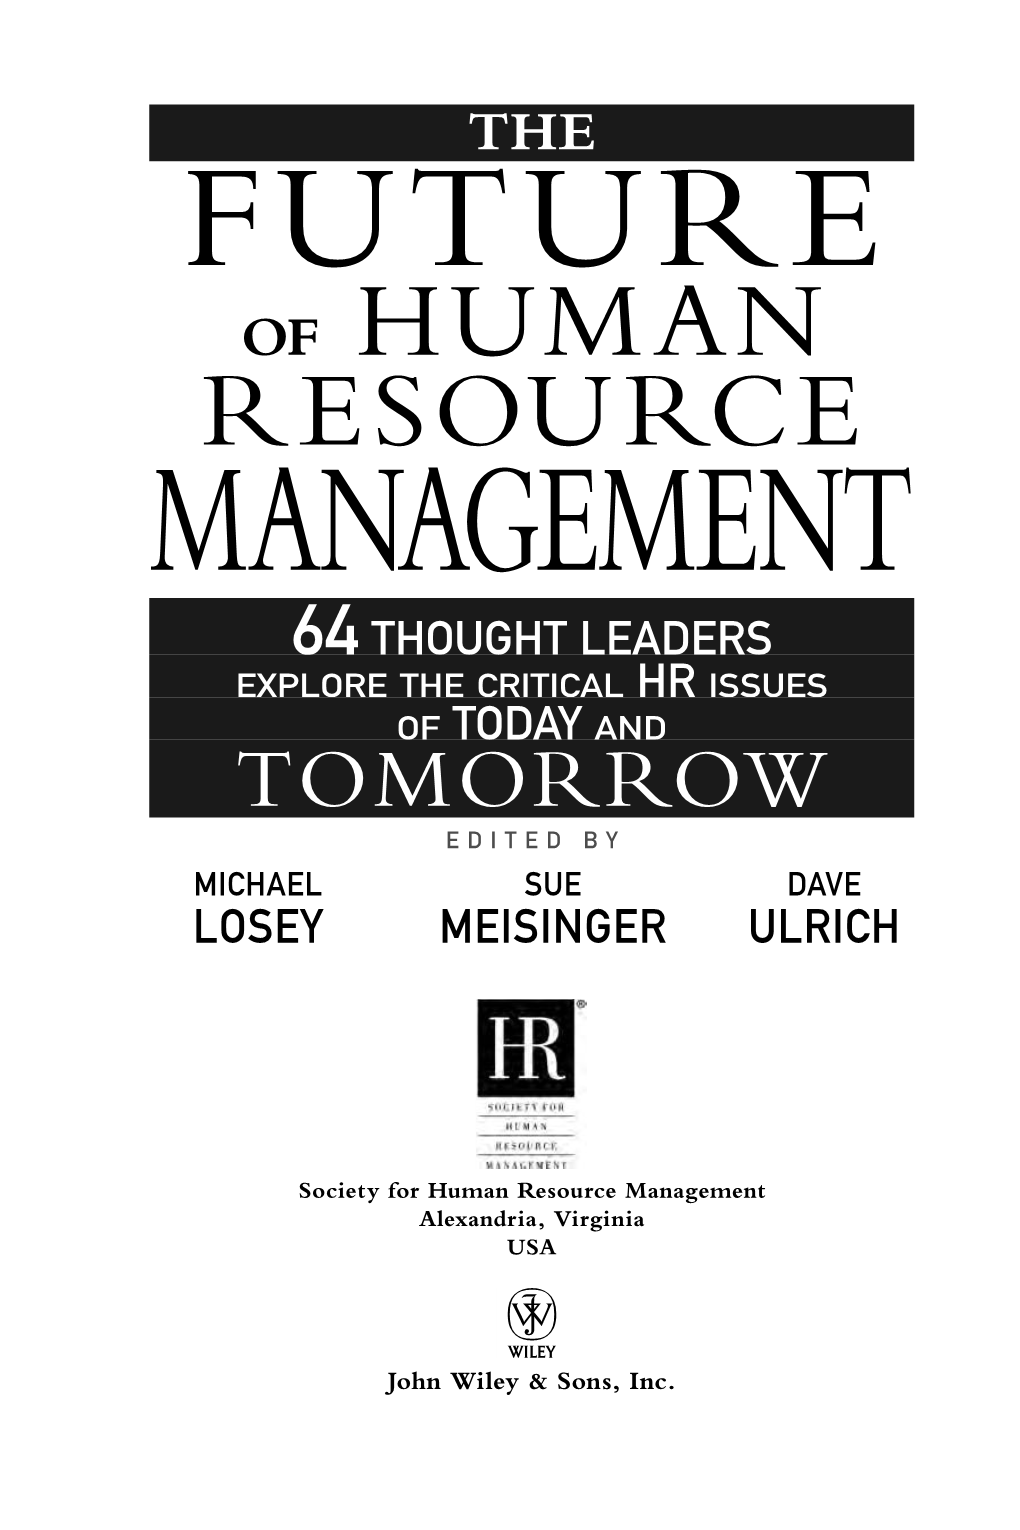 PERSONNEL MANAGEMENT the Future of Human Resource Management.PDF